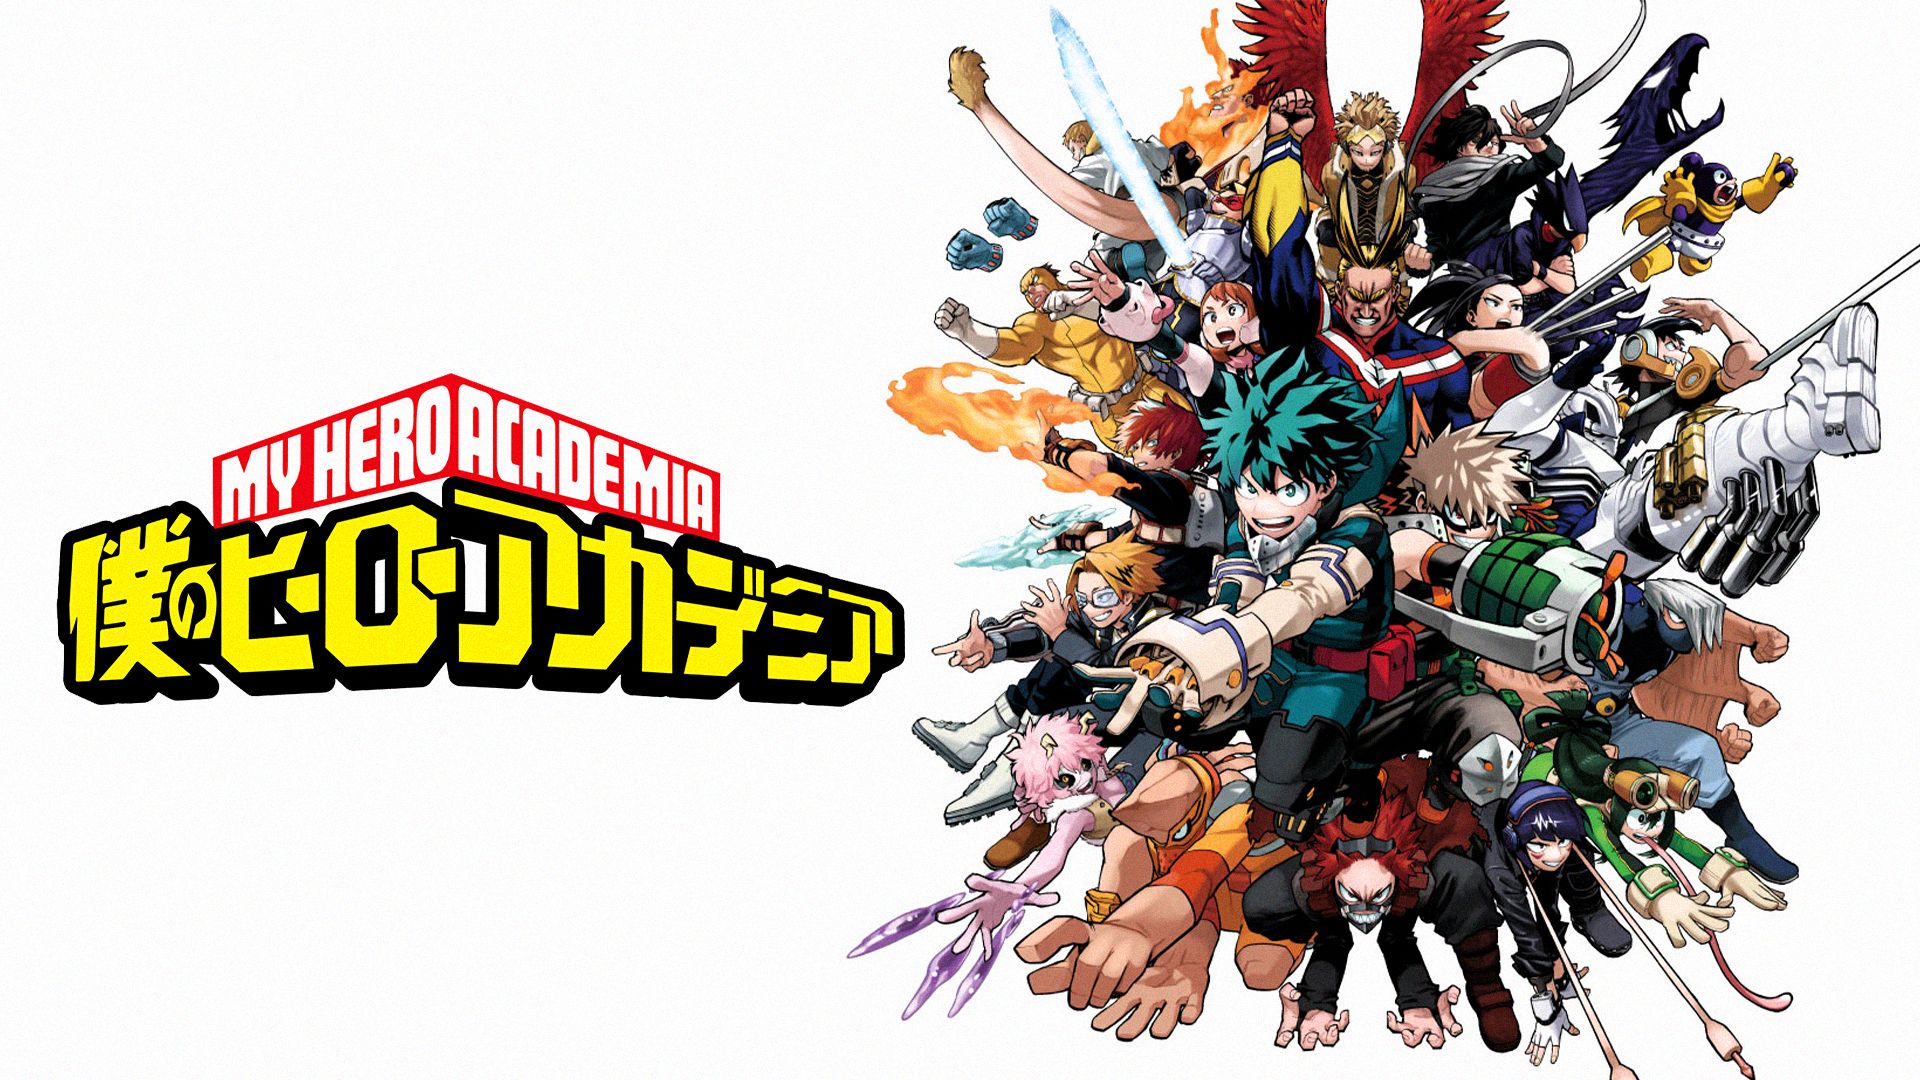 Theory Thursday: 'My Hero Academia's' Final Arc May Not Be The End After All's Multiverse